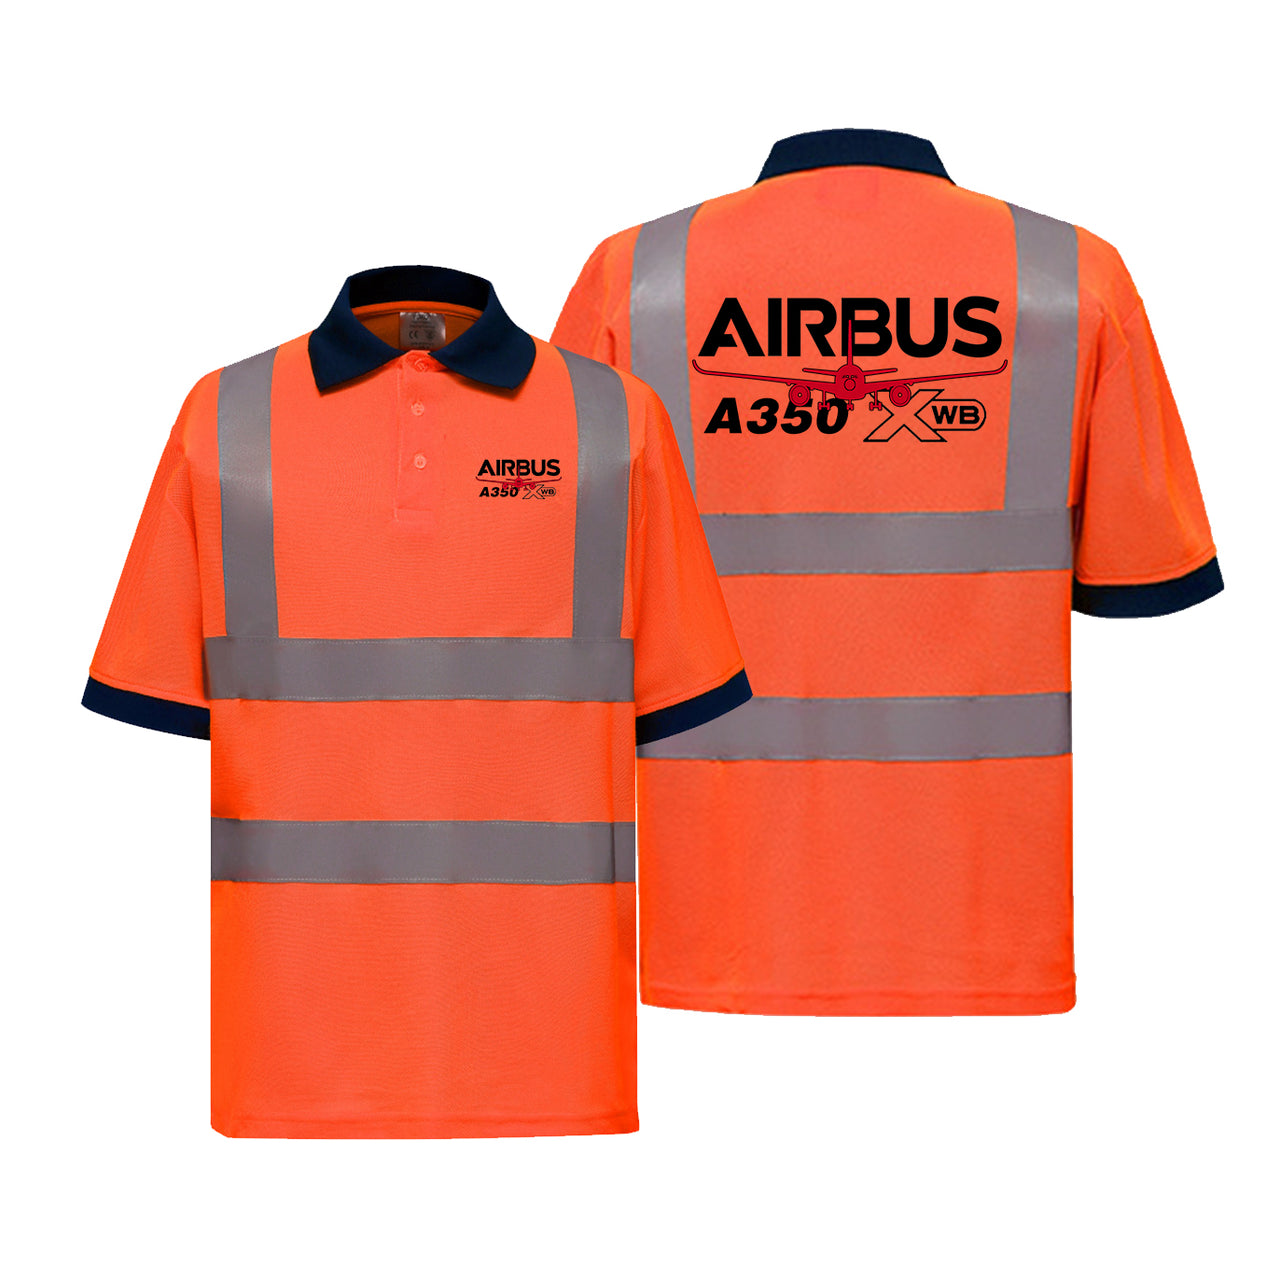 Amazing Airbus A350 Designed Reflective Polo T-Shirts